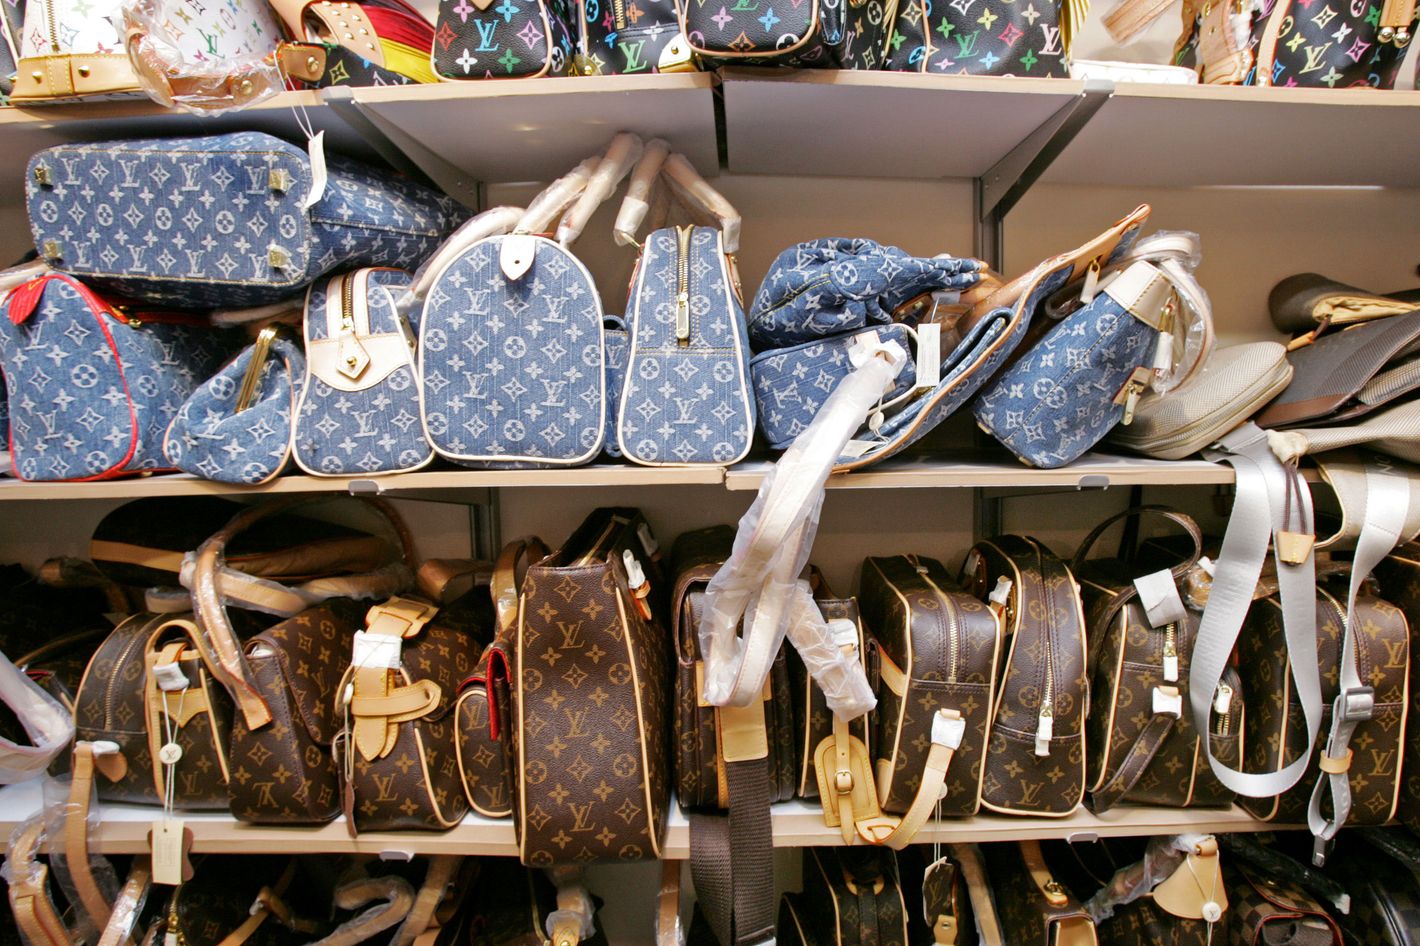 The Truth About the Counterfeit Handbags